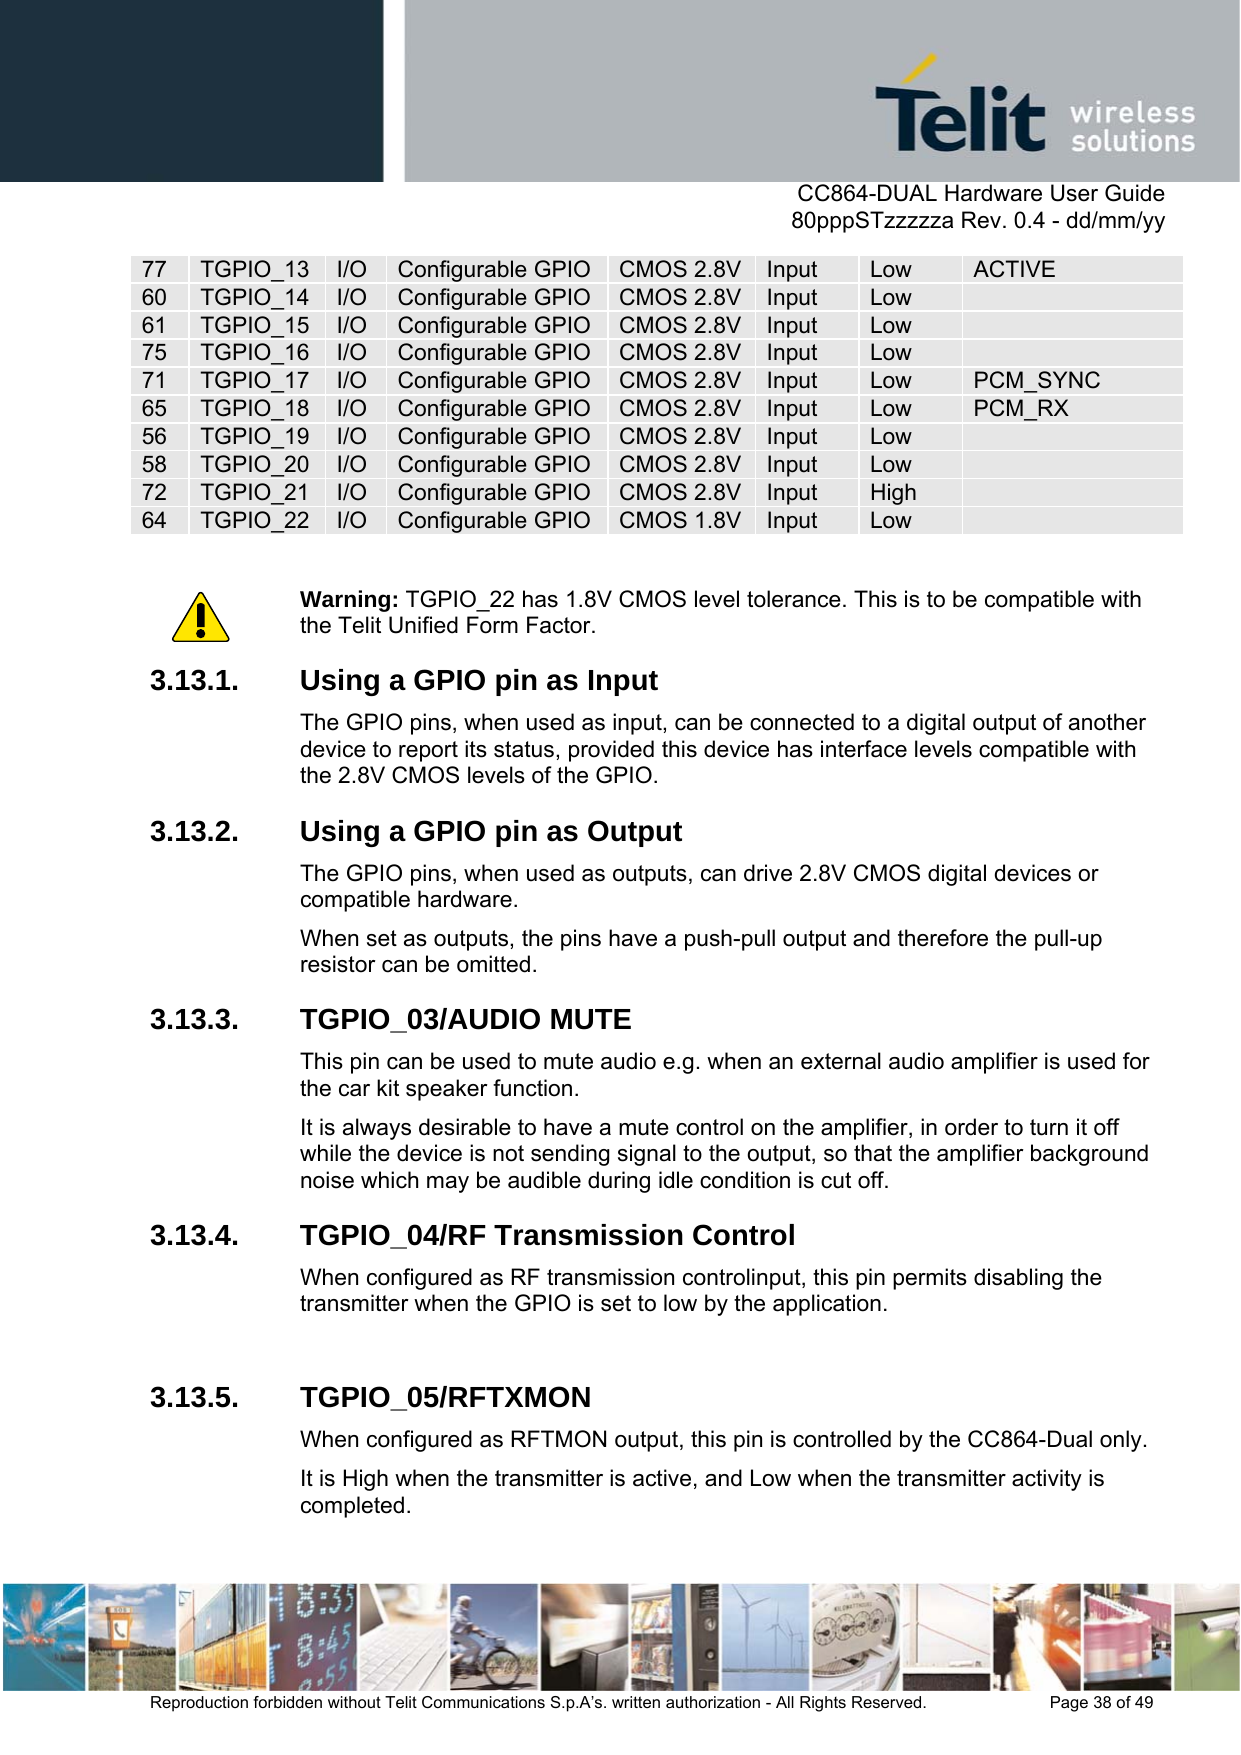      CC864-DUAL Hardware User Guide   80pppSTzzzzza Rev. 0.4 - dd/mm/yy   Reproduction forbidden without Telit Communications S.p.A’s. written authorization - All Rights Reserved.    Page 38 of 49  77  TGPIO_13  I/O Configurable GPIO CMOS 2.8V Input  Low  ACTIVE 60  TGPIO_14  I/O Configurable GPIO CMOS 2.8V Input  Low   61  TGPIO_15  I/O Configurable GPIO CMOS 2.8V Input  Low   75  TGPIO_16  I/O Configurable GPIO CMOS 2.8V Input  Low   71  TGPIO_17  I/O Configurable GPIO CMOS 2.8V Input  Low  PCM_SYNC 65  TGPIO_18  I/O Configurable GPIO CMOS 2.8V Input  Low  PCM_RX 56  TGPIO_19  I/O Configurable GPIO CMOS 2.8V Input  Low   58  TGPIO_20  I/O Configurable GPIO CMOS 2.8V Input  Low   72  TGPIO_21  I/O Configurable GPIO CMOS 2.8V Input  High   64  TGPIO_22  I/O Configurable GPIO CMOS 1.8V Input  Low    Warning: TGPIO_22 has 1.8V CMOS level tolerance. This is to be compatible with the Telit Unified Form Factor. 3.13.1.  Using a GPIO pin as Input The GPIO pins, when used as input, can be connected to a digital output of another device to report its status, provided this device has interface levels compatible with the 2.8V CMOS levels of the GPIO. 3.13.2.  Using a GPIO pin as Output The GPIO pins, when used as outputs, can drive 2.8V CMOS digital devices or compatible hardware.  When set as outputs, the pins have a push-pull output and therefore the pull-up resistor can be omitted. 3.13.3. TGPIO_03/AUDIO MUTE This pin can be used to mute audio e.g. when an external audio amplifier is used for the car kit speaker function.  It is always desirable to have a mute control on the amplifier, in order to turn it off while the device is not sending signal to the output, so that the amplifier background noise which may be audible during idle condition is cut off.  3.13.4.  TGPIO_04/RF Transmission Control When configured as RF transmission controlinput, this pin permits disabling the transmitter when the GPIO is set to low by the application.   3.13.5. TGPIO_05/RFTXMON When configured as RFTMON output, this pin is controlled by the CC864-Dual only.  It is High when the transmitter is active, and Low when the transmitter activity is completed.  